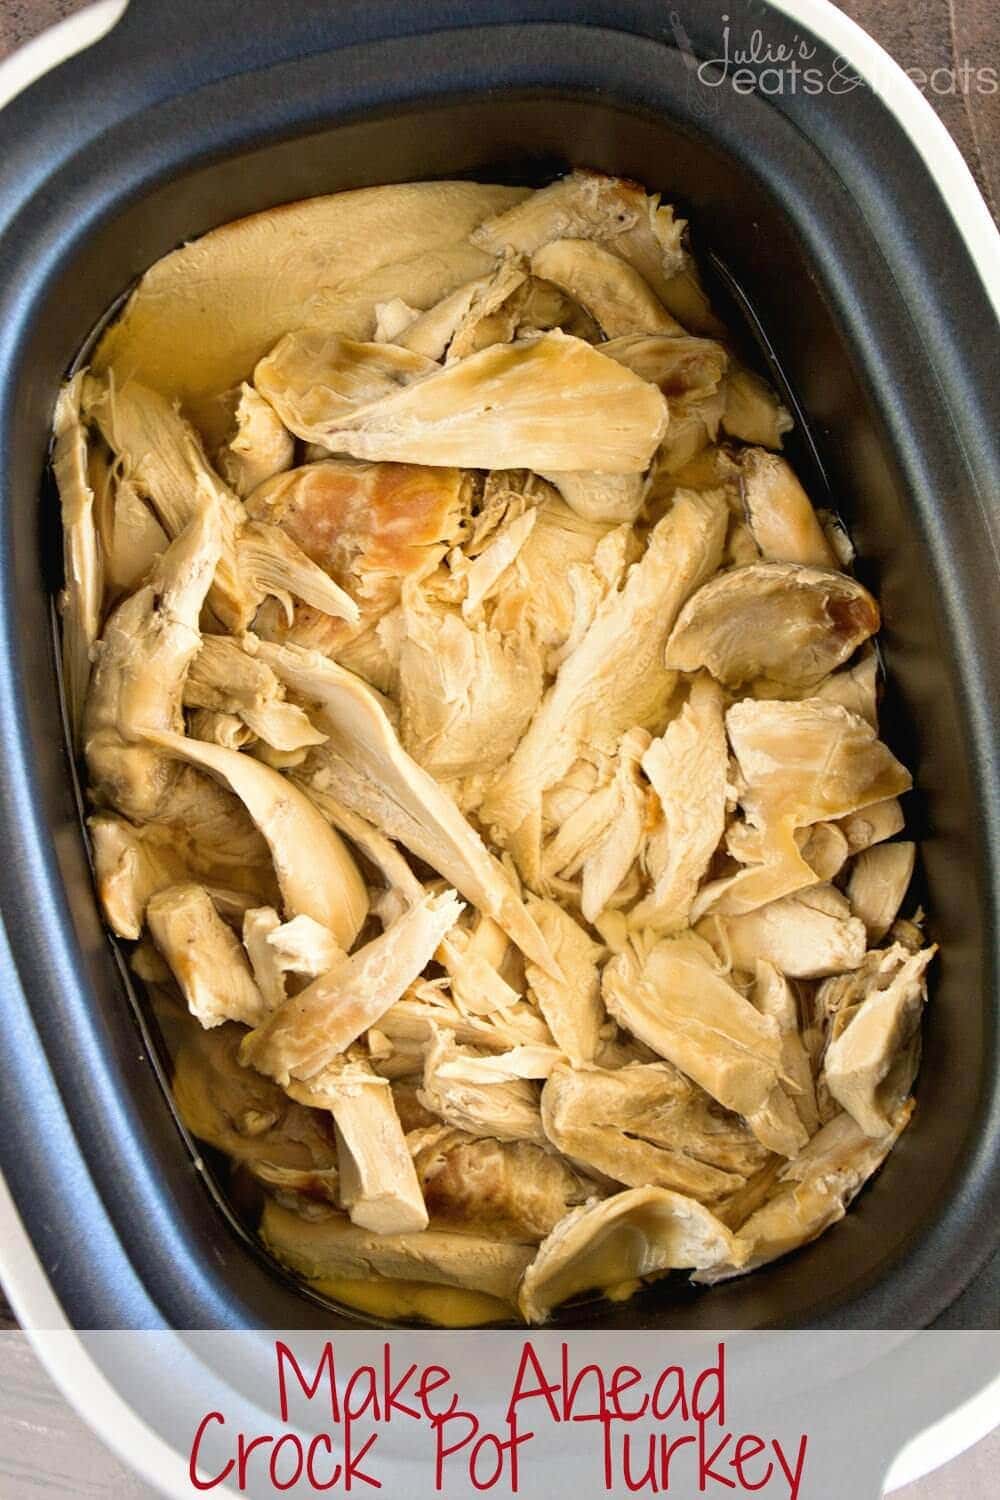 Crock Pot Make Ahead Turkey Recipe ~ The Most Amazing Turkey EVER! Easy, Delicious, Flavorful and Moist Turkey that is Baked in the Oven then Slow Cooked the Day You Serve it! This is the ONLY Turkey Recipe You Need!